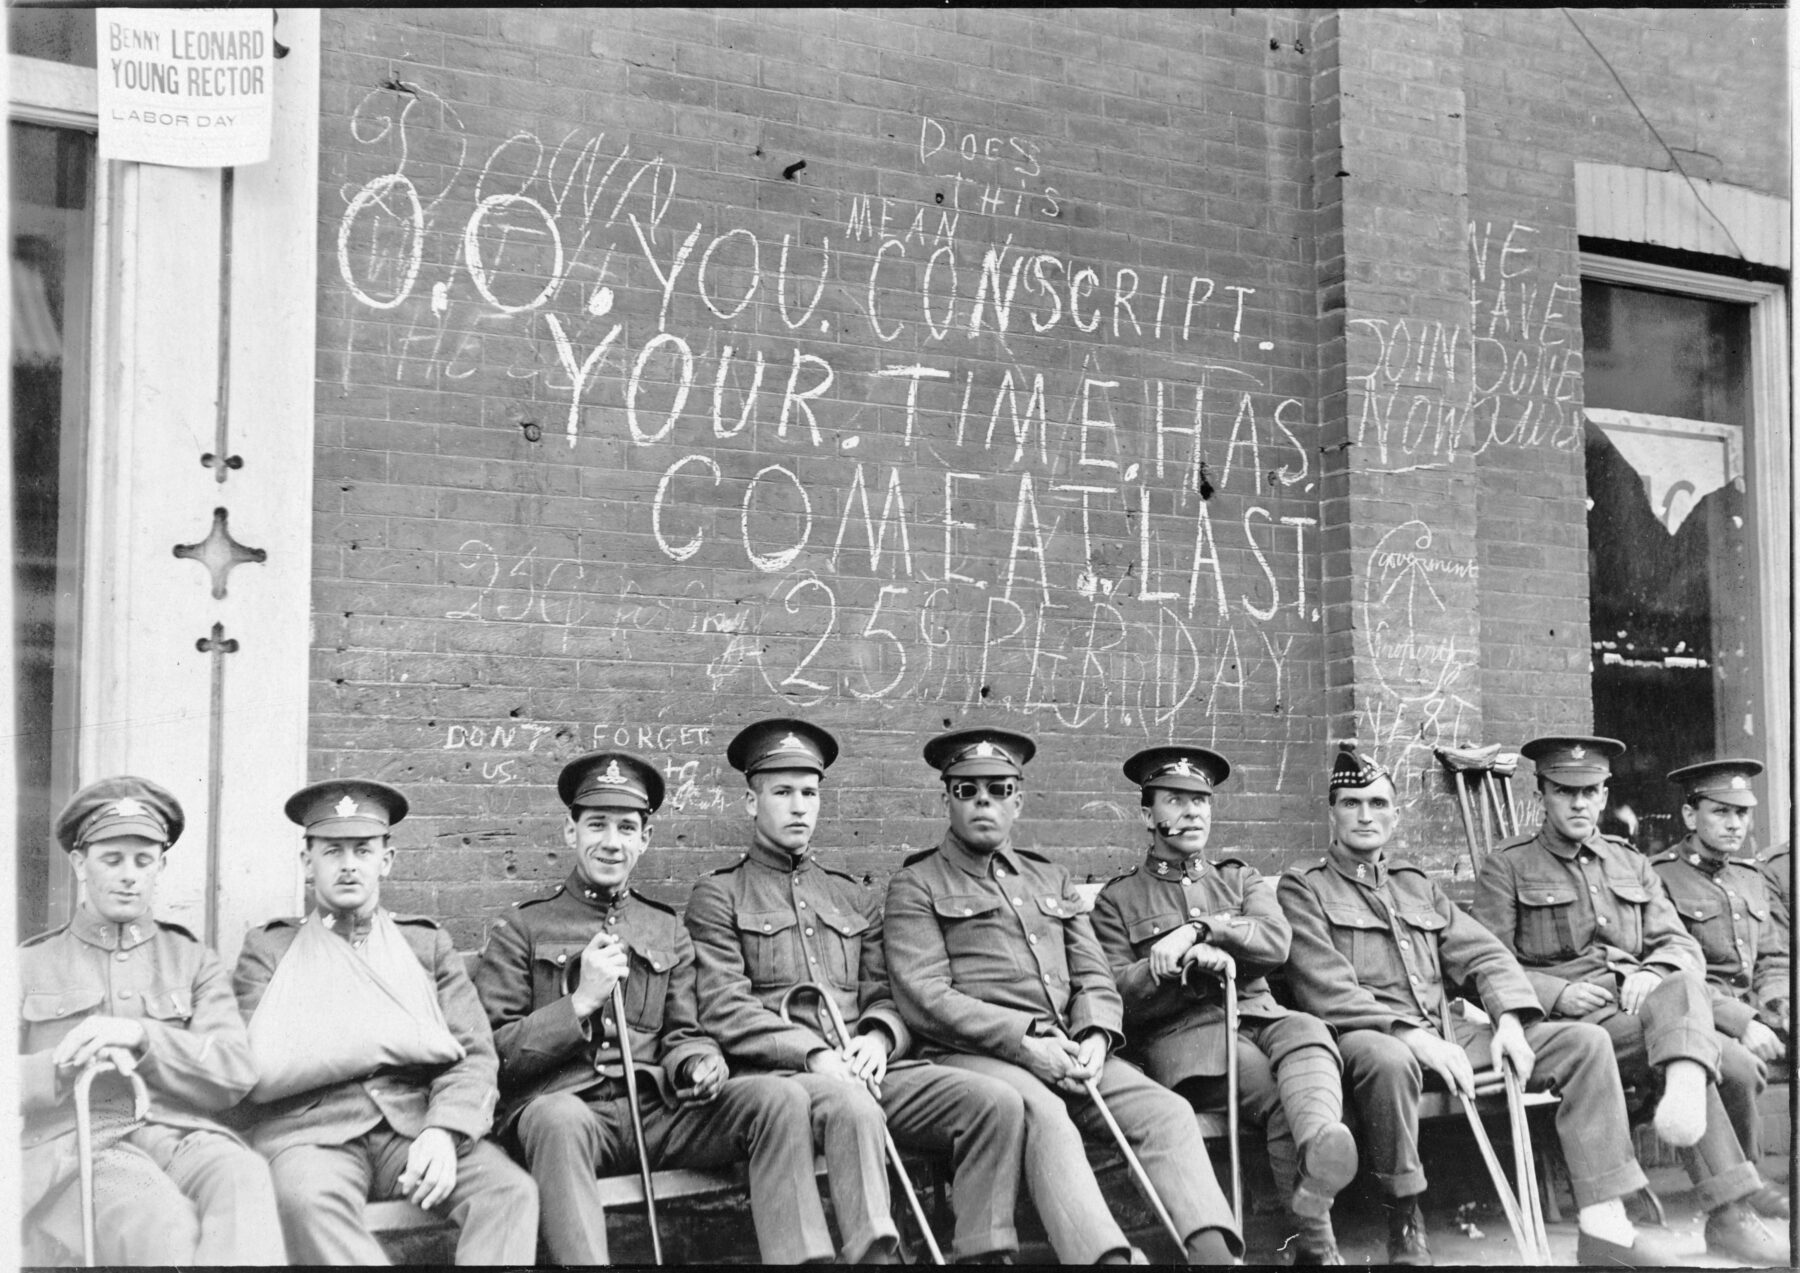 Nine men are seated in a row wearing military uniforms and holding assistive devices including canes and crutches. On the brick wall behind them is graffiti reading, in part, “Conscript your time has come at last,” “Join now,” and “Don’t forget us.”